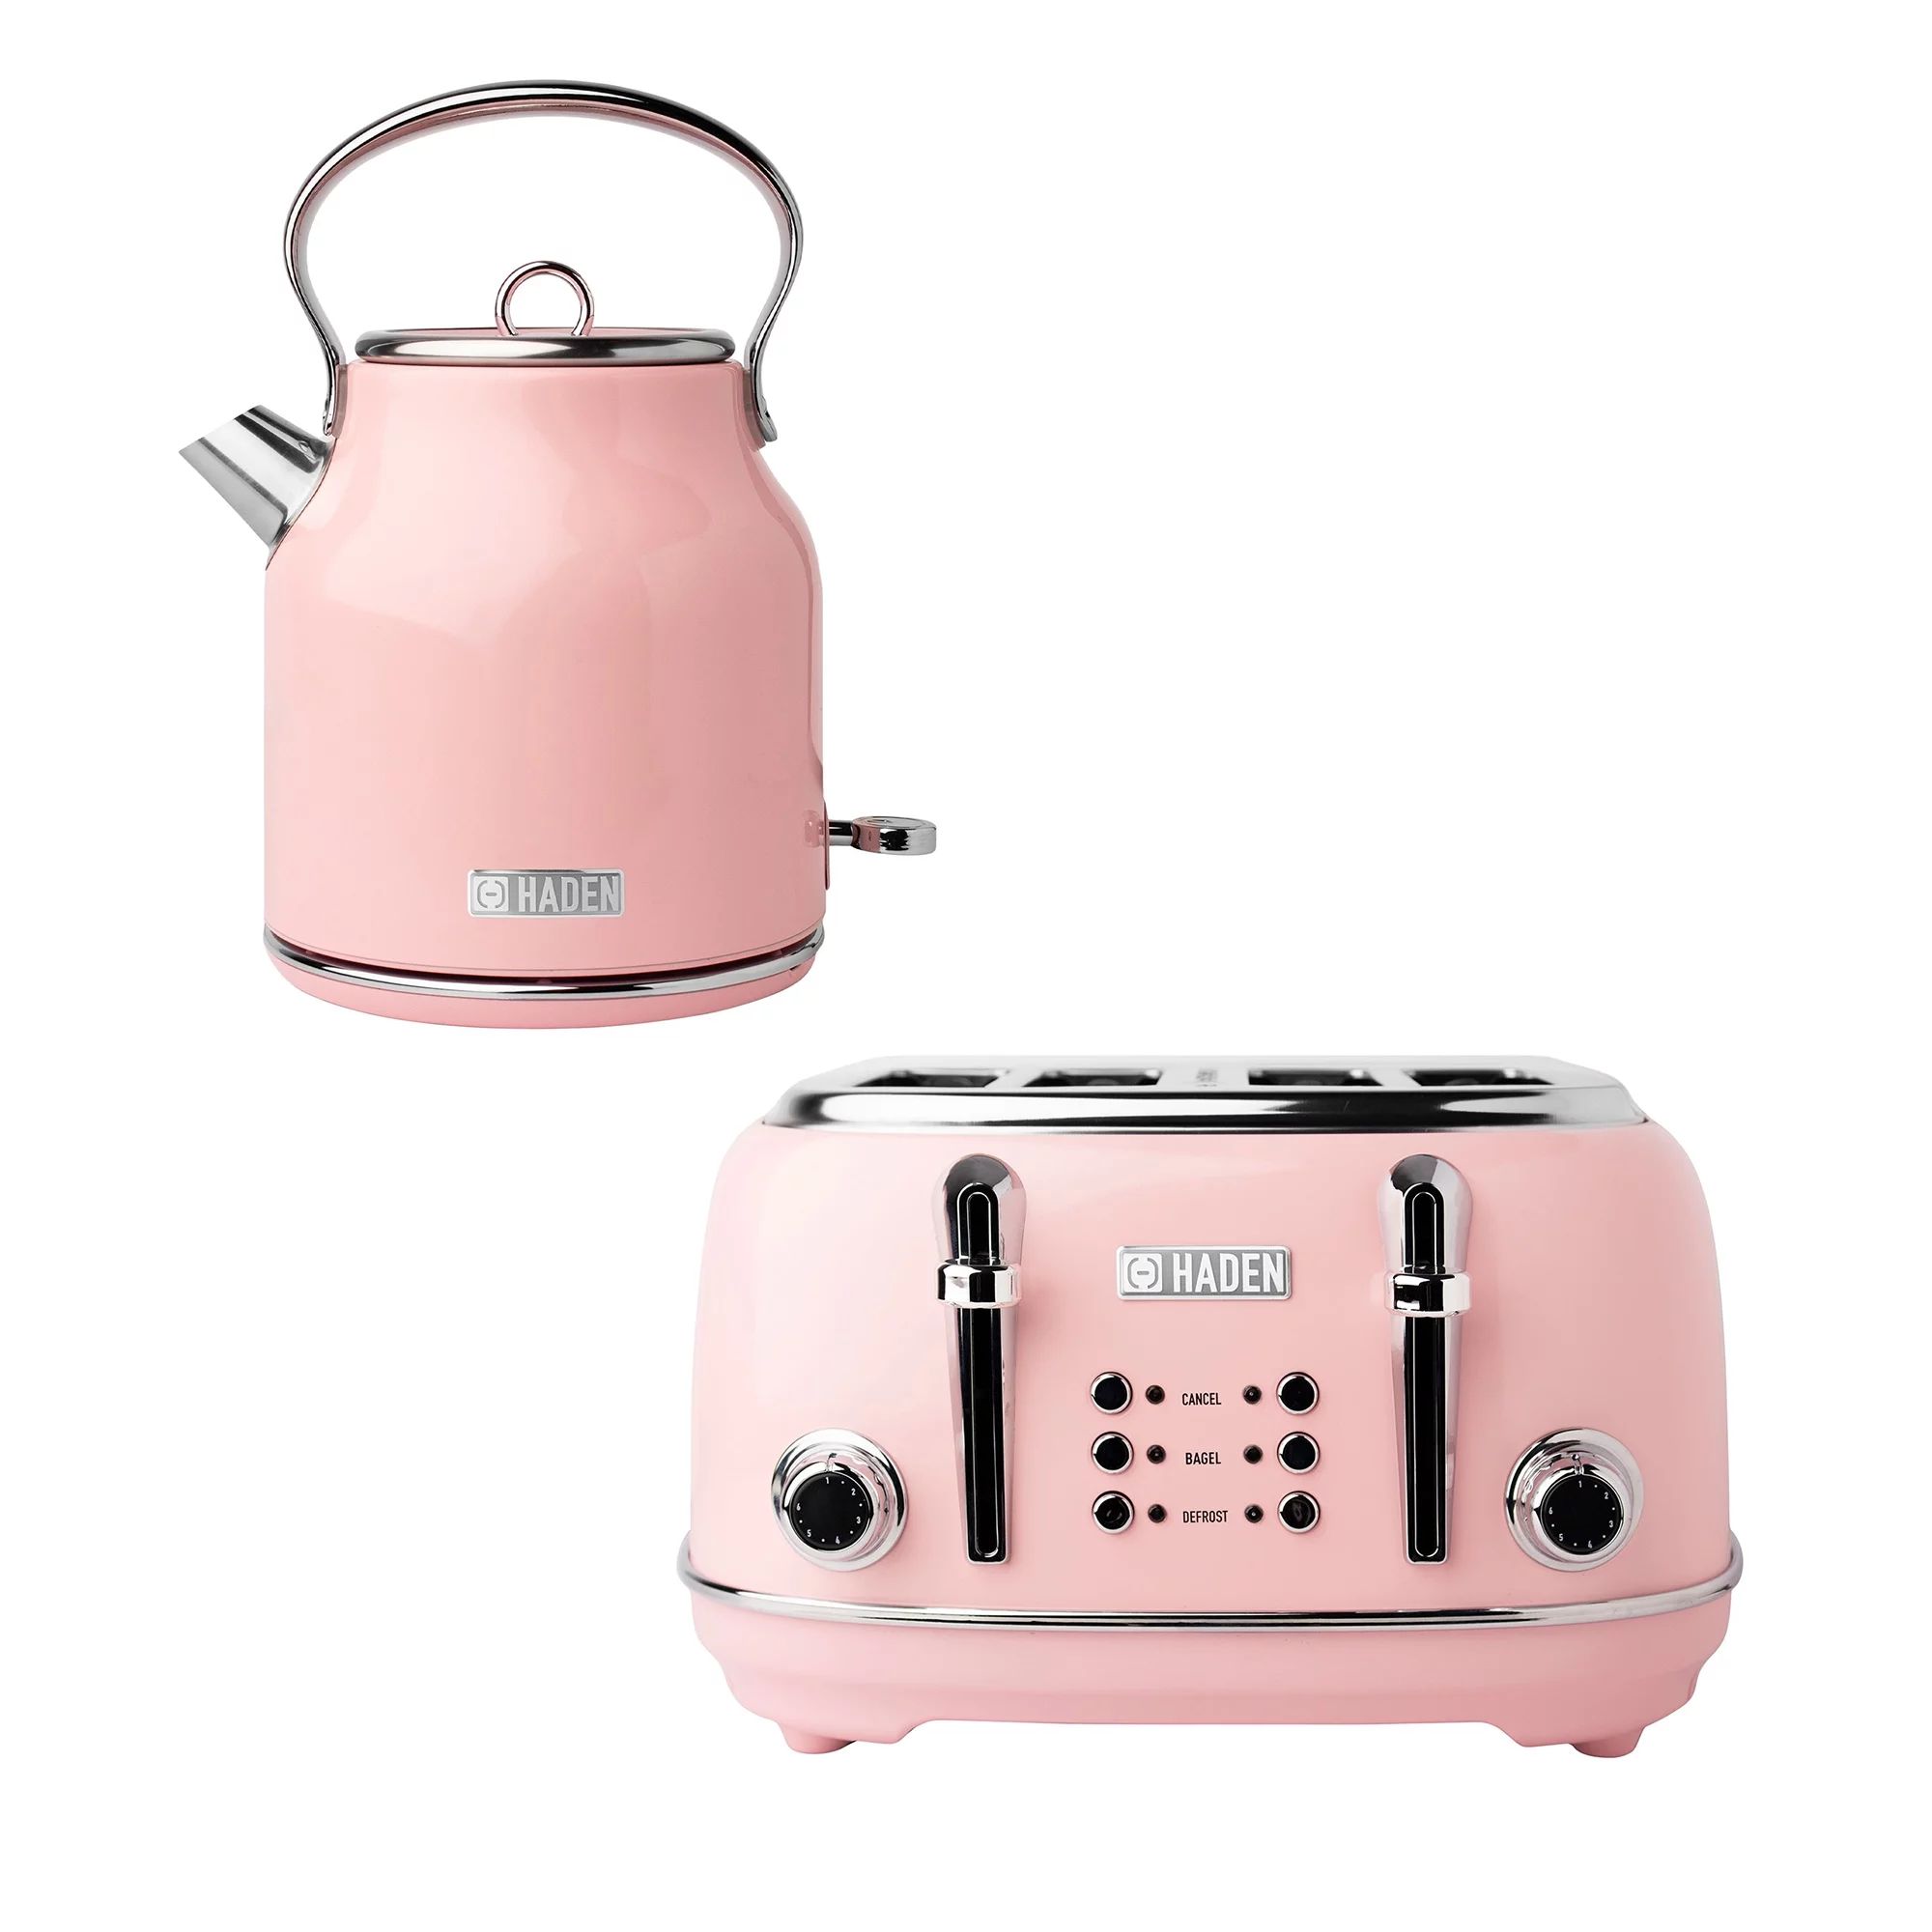 Haden Heritage 1.7 L Stainless Steel Body Electric Kettle w/ Toaster, Pink | Walmart (US)